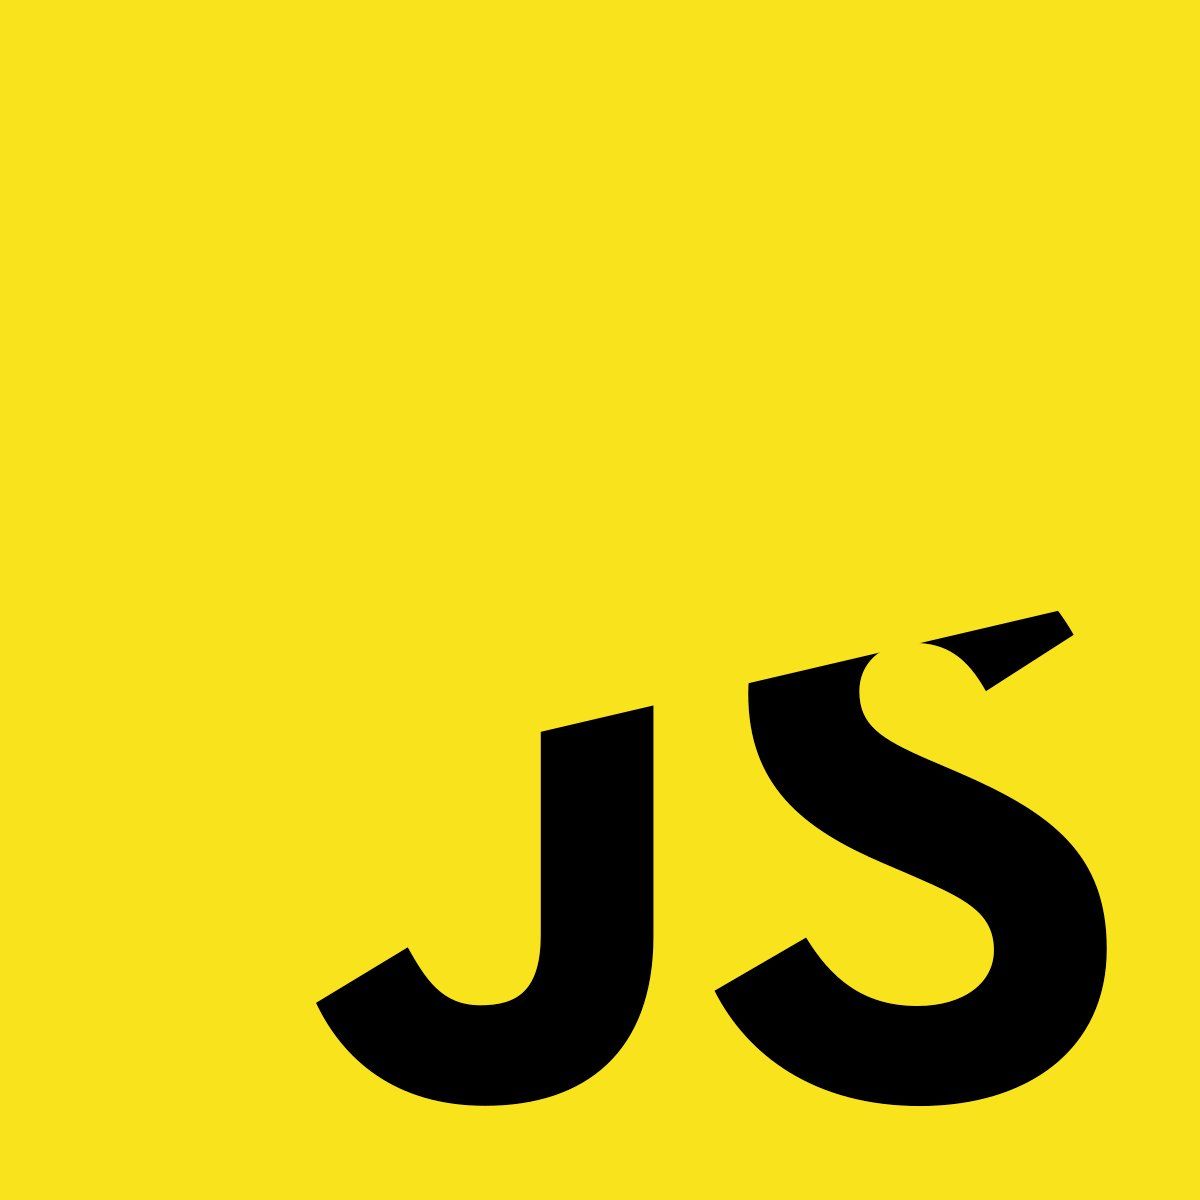 The JavaScript logo but the top of the J and the top of the S are clipped off